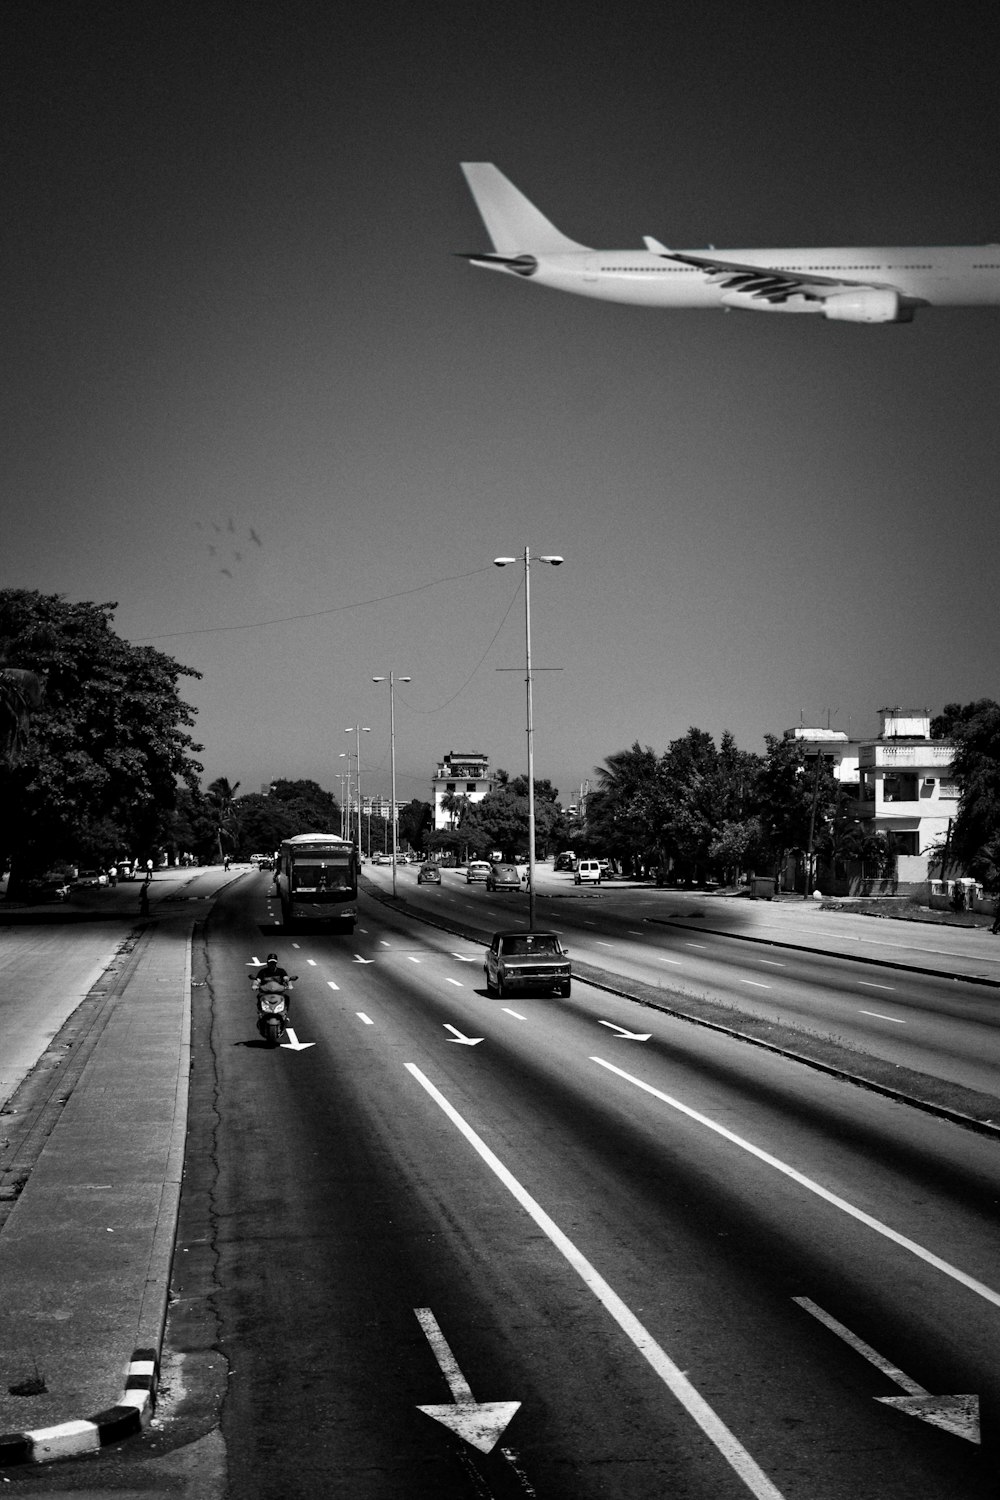 grayscale photo of passenger plane passing highway with vehicles